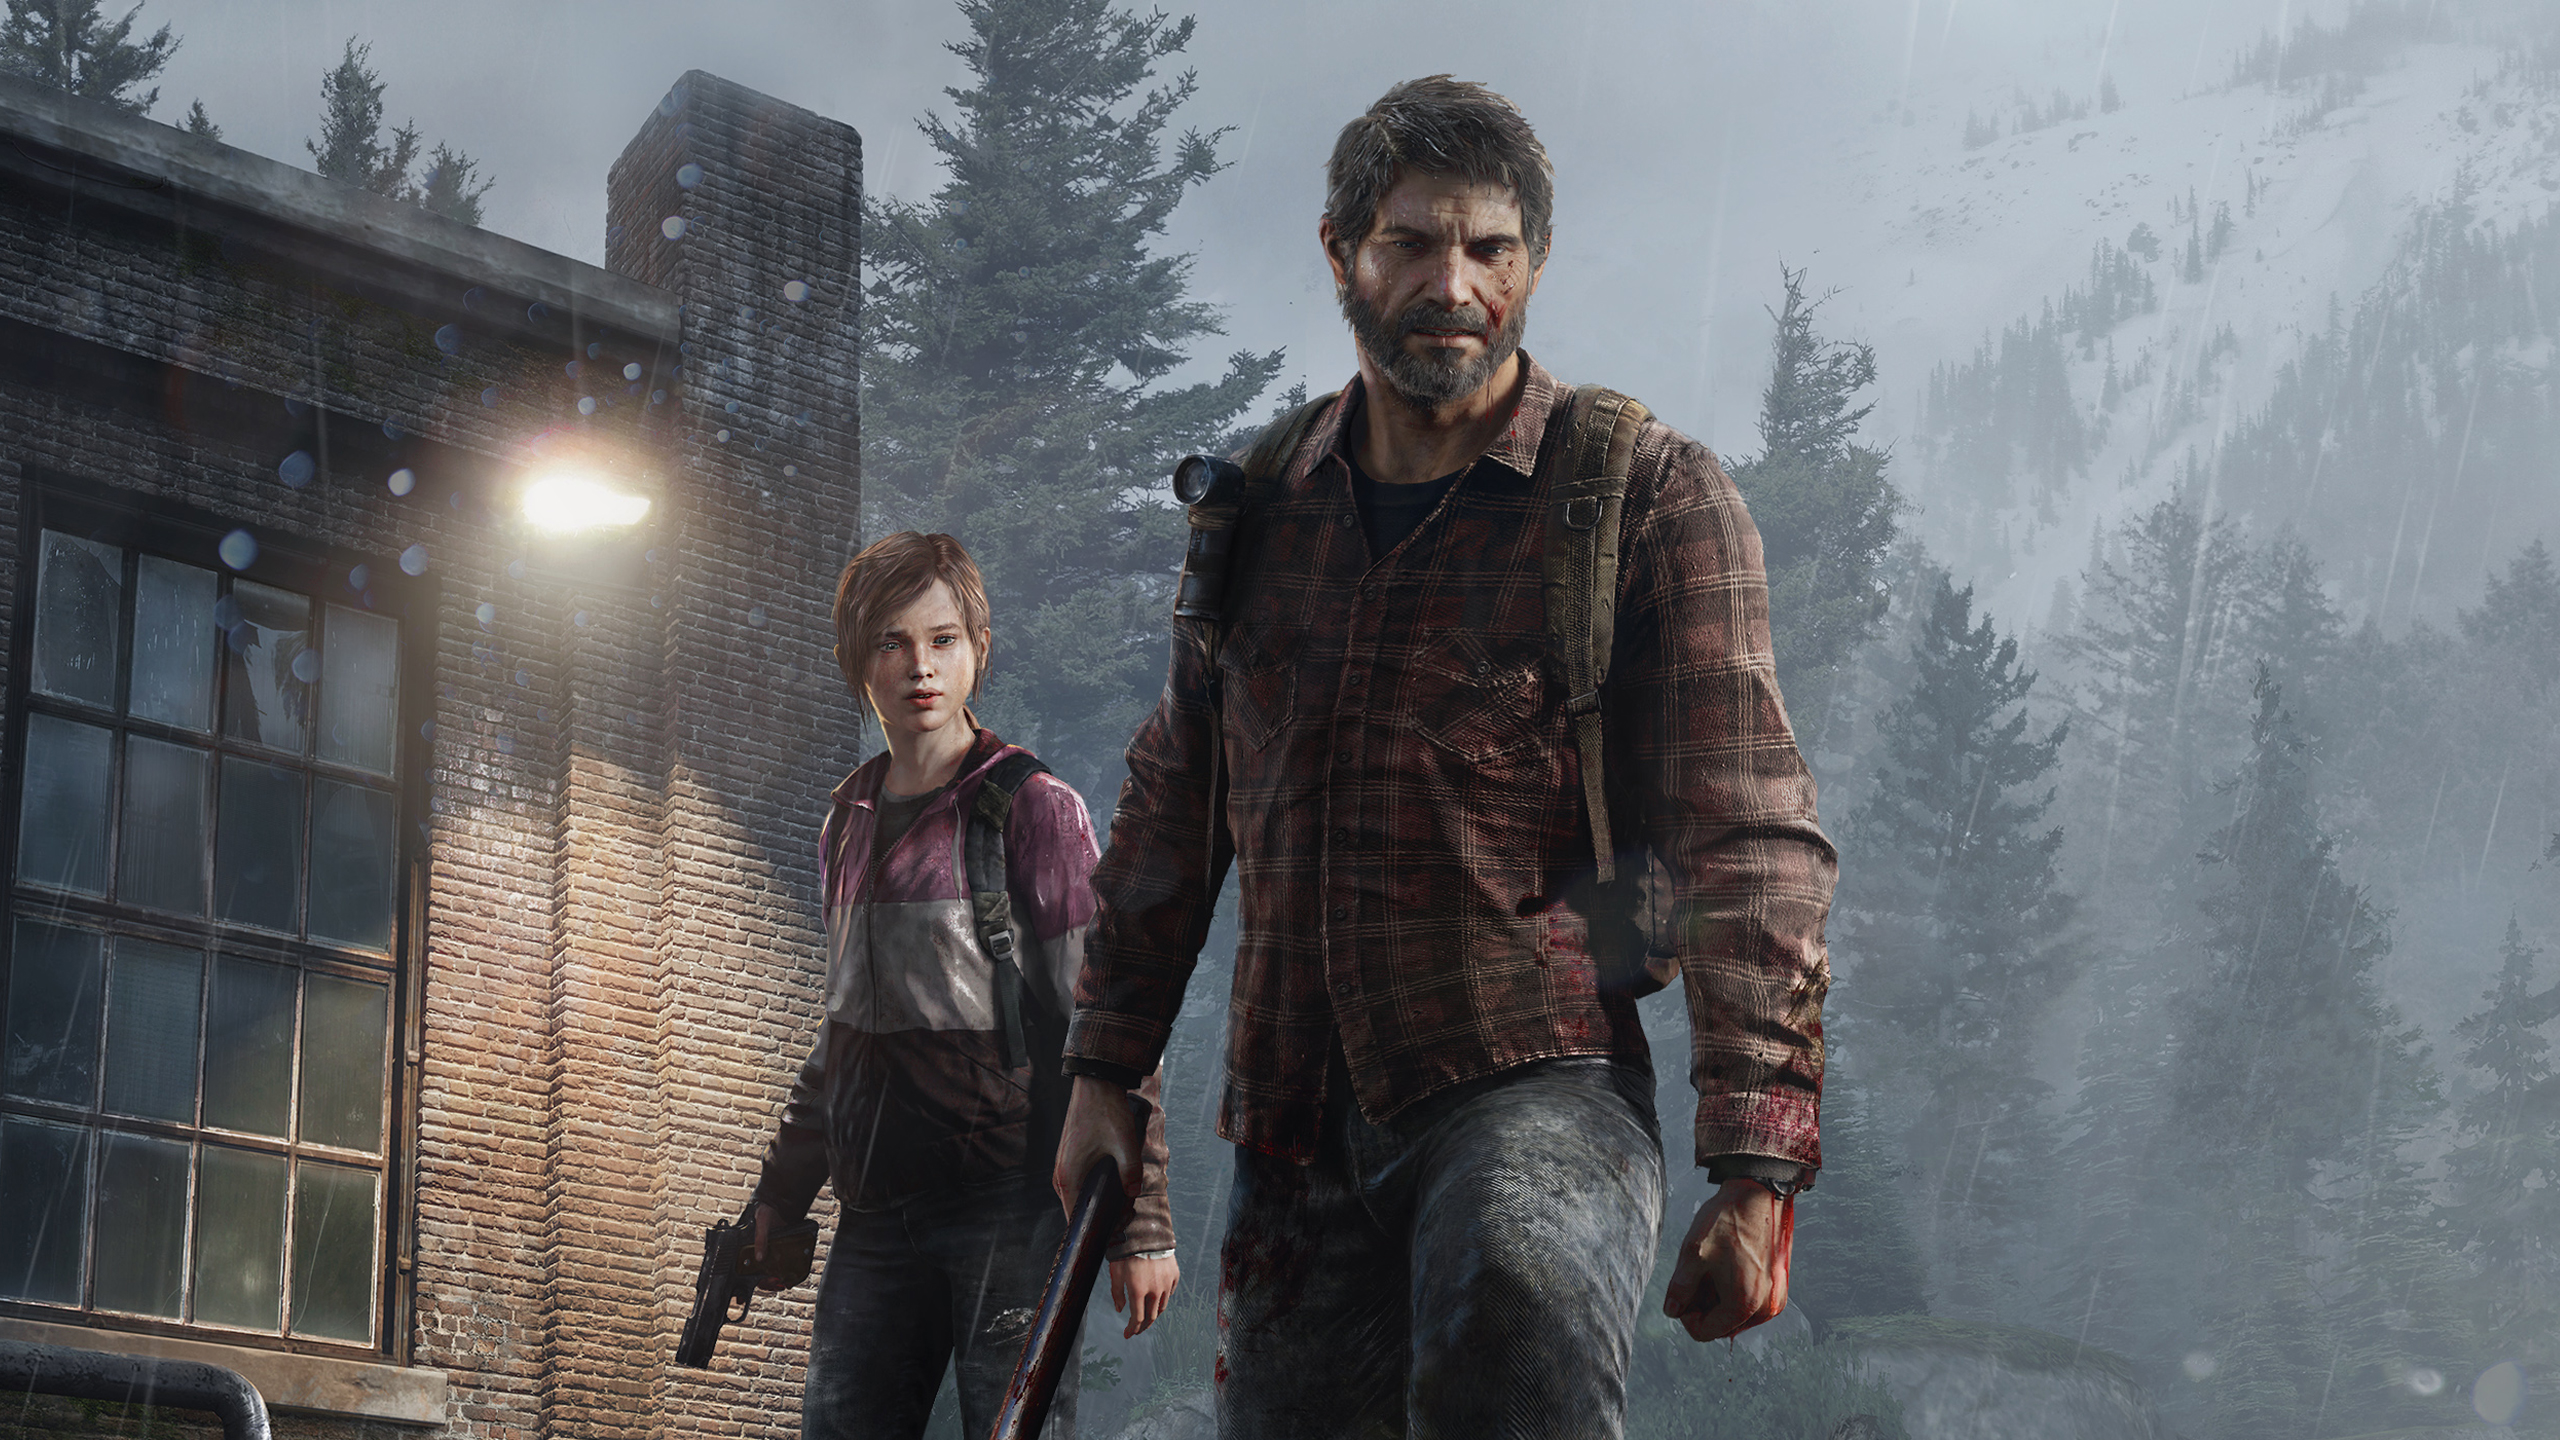 The Last Of Us wallpapers for desktop, download free The Last Of Us  pictures and backgrounds for PC 